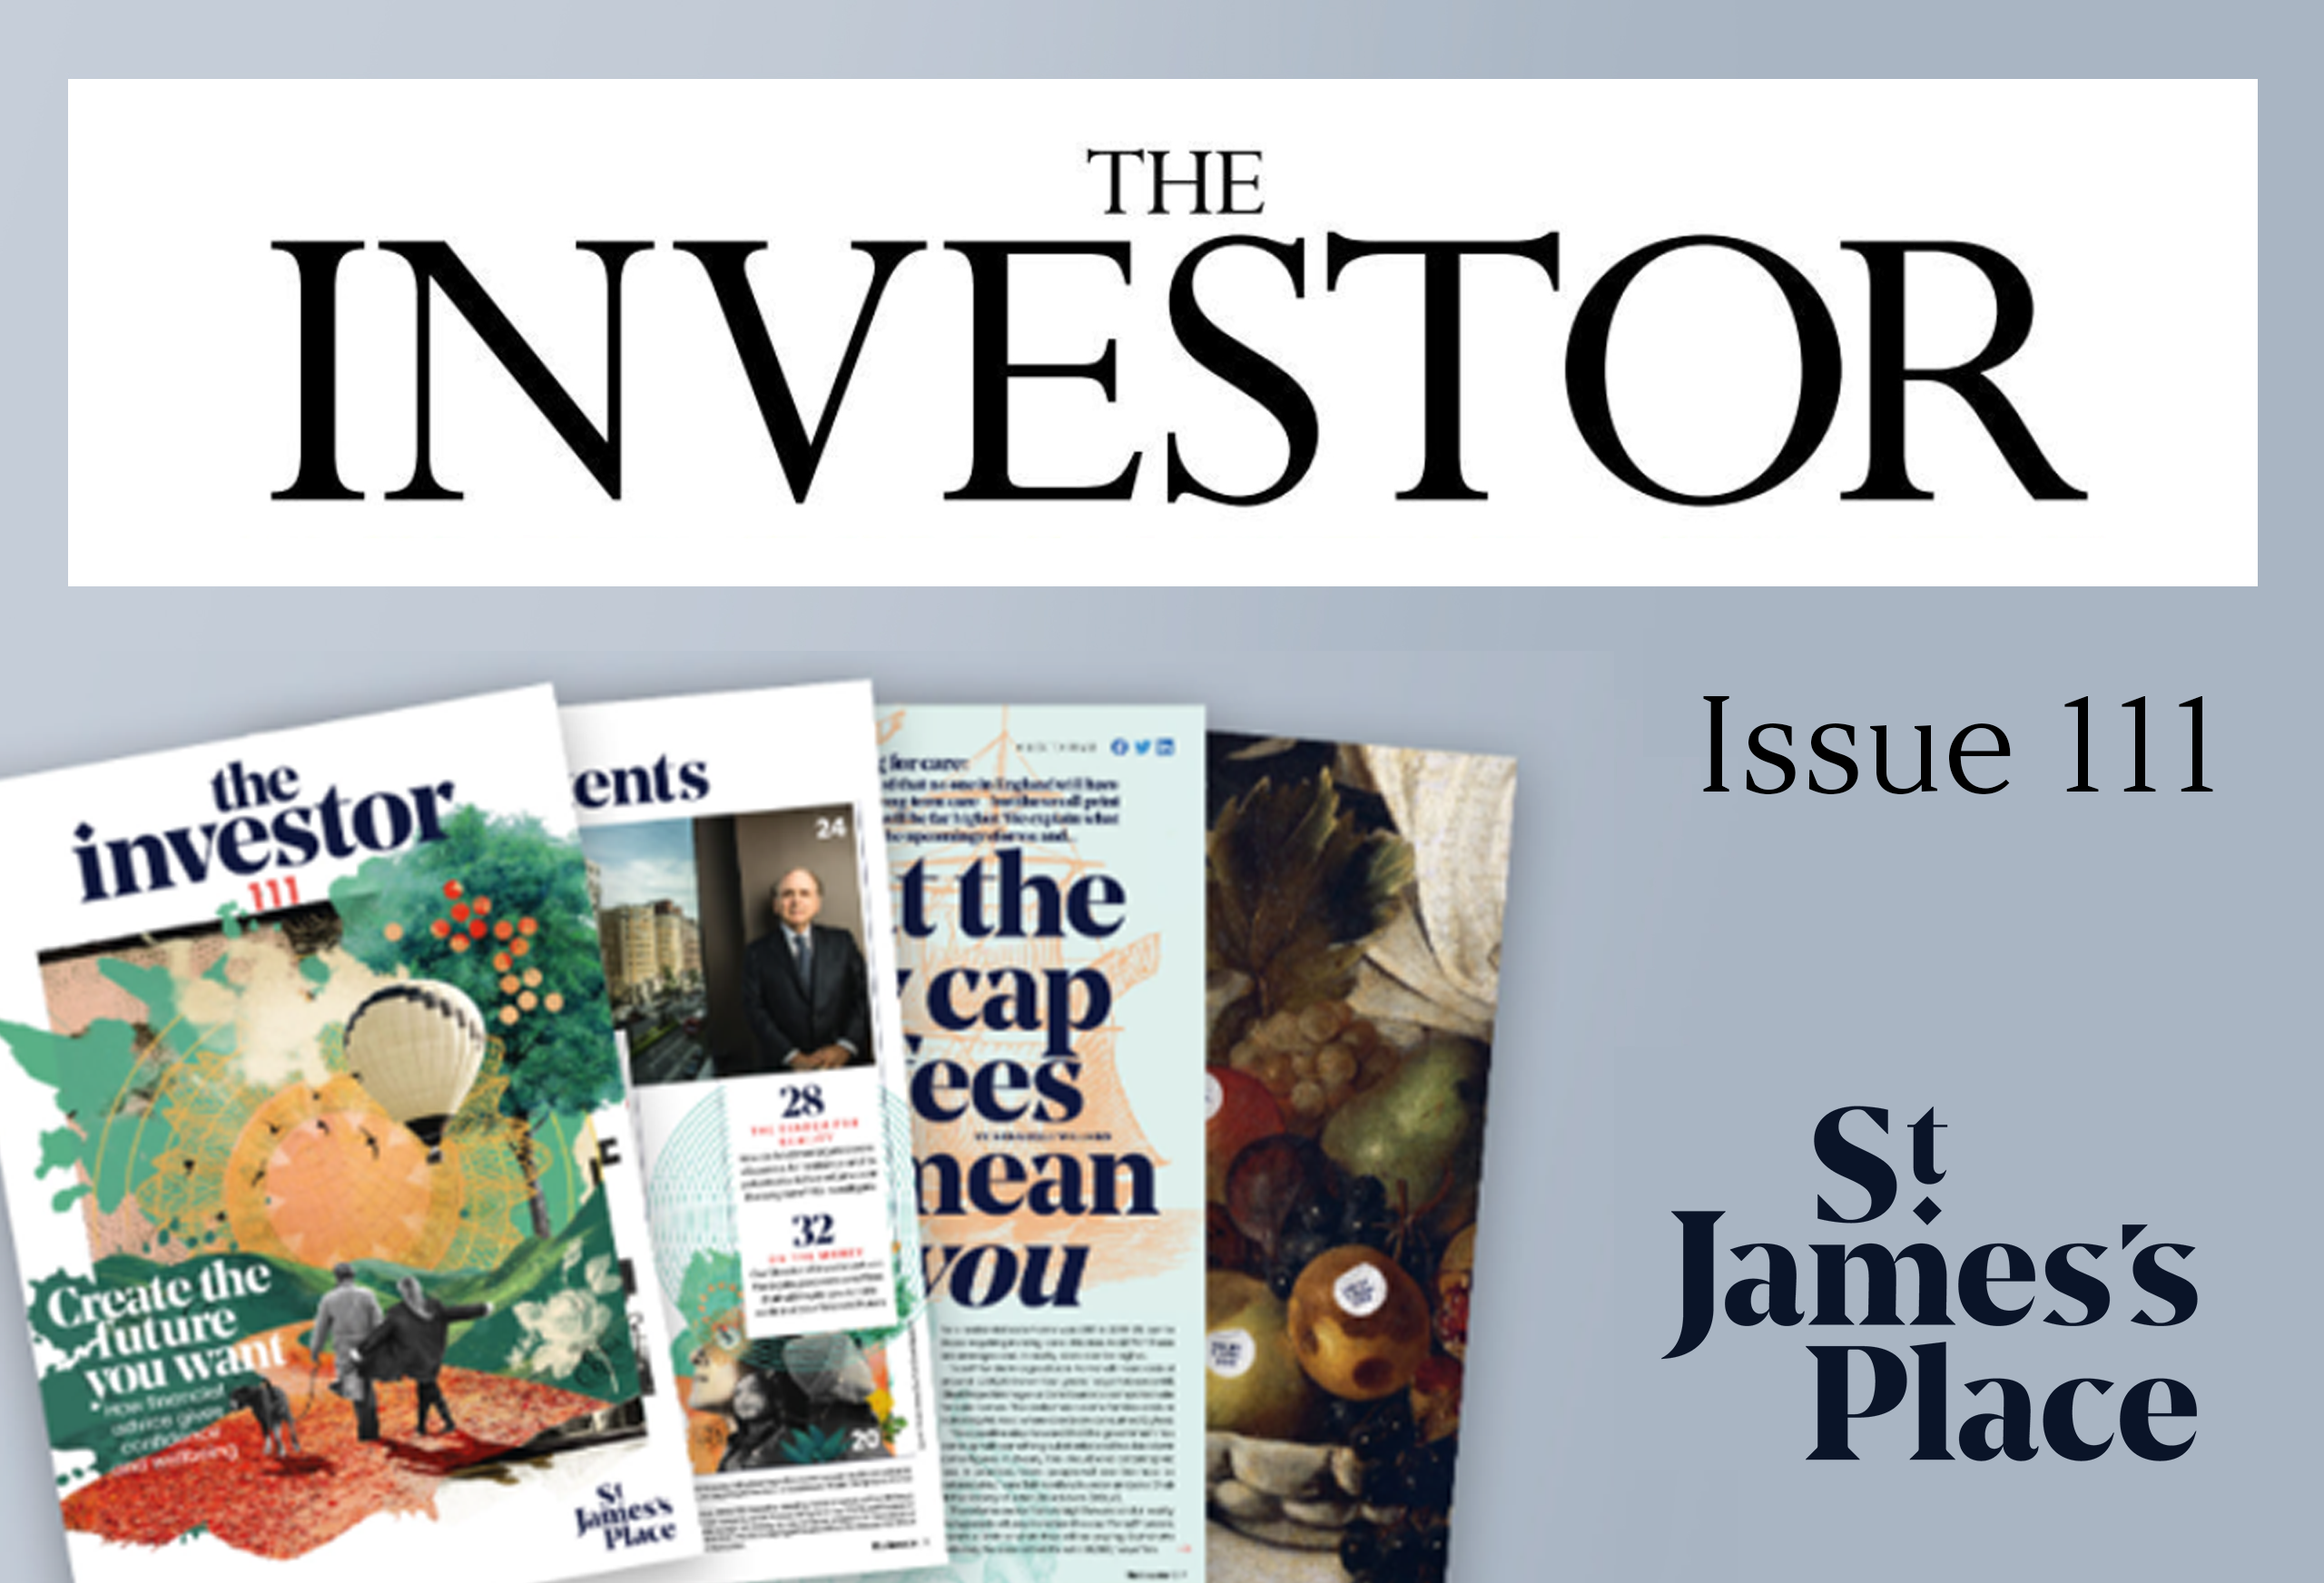 The Investor, the magazine from St. James’s Place – Issue 111